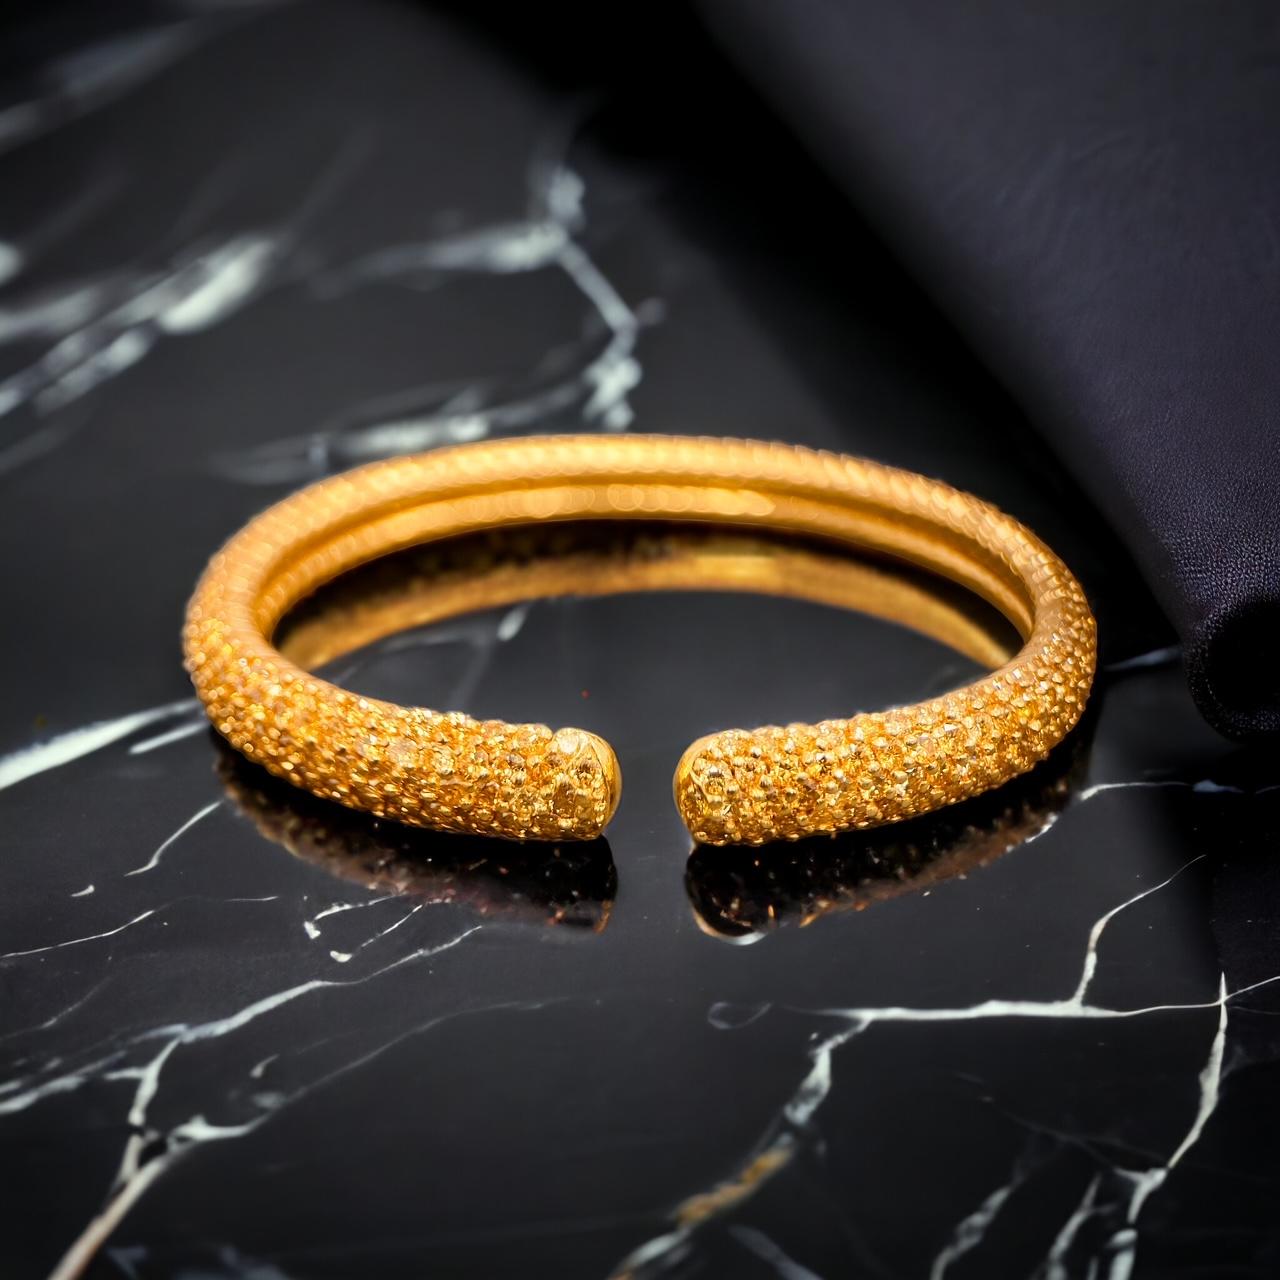 A pavé fancy yellow diamond sprung bangle in 18ct yellow gold; With approximately 12cts of diamonds of strong yellow hue. Bangle width 9mm. External circumference: 5.7mm. Internal circumference: 5mm. Marked 750 18K. Price 32,000£. Item is in very